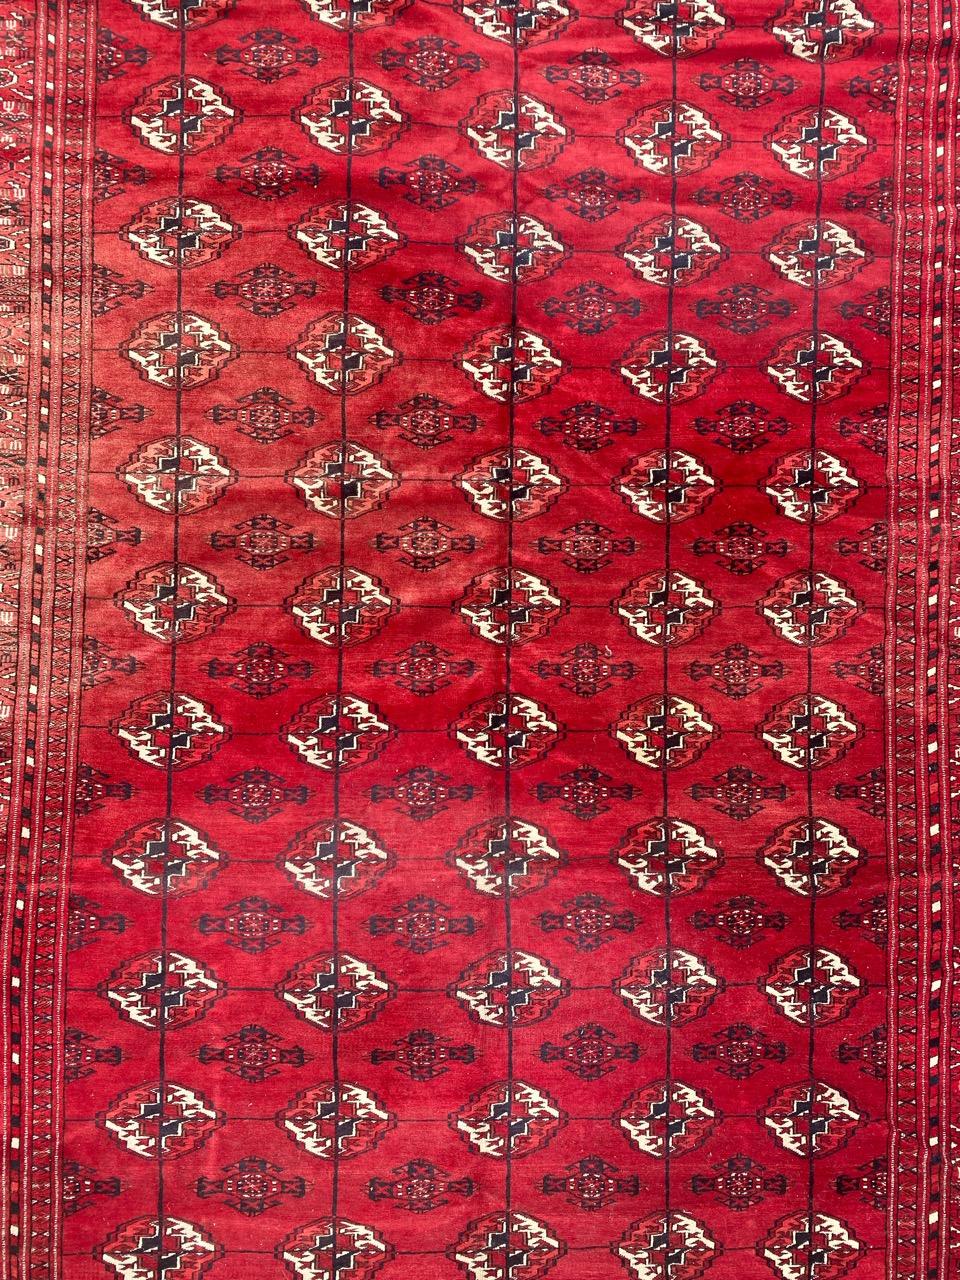 Beautiful Bokhara Afghan rug with a geometrical design and nice colors, entirely hand knotted with wool velvet on wool foundation.

✨✨✨
